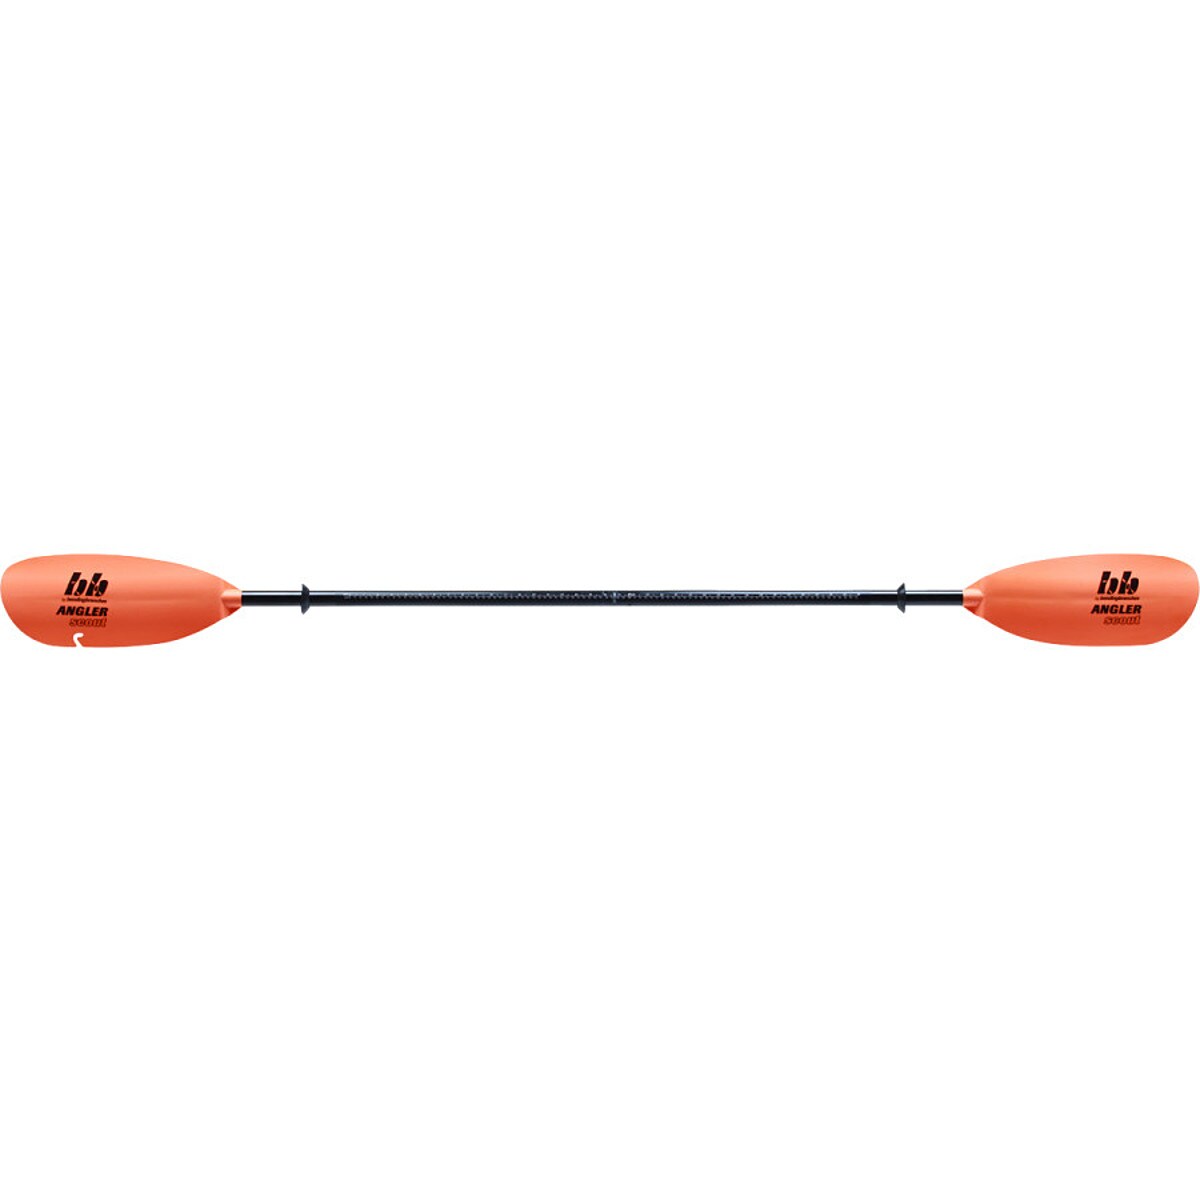 Bending Branches Scout Angler Paddle - Straight Shaft - 2022